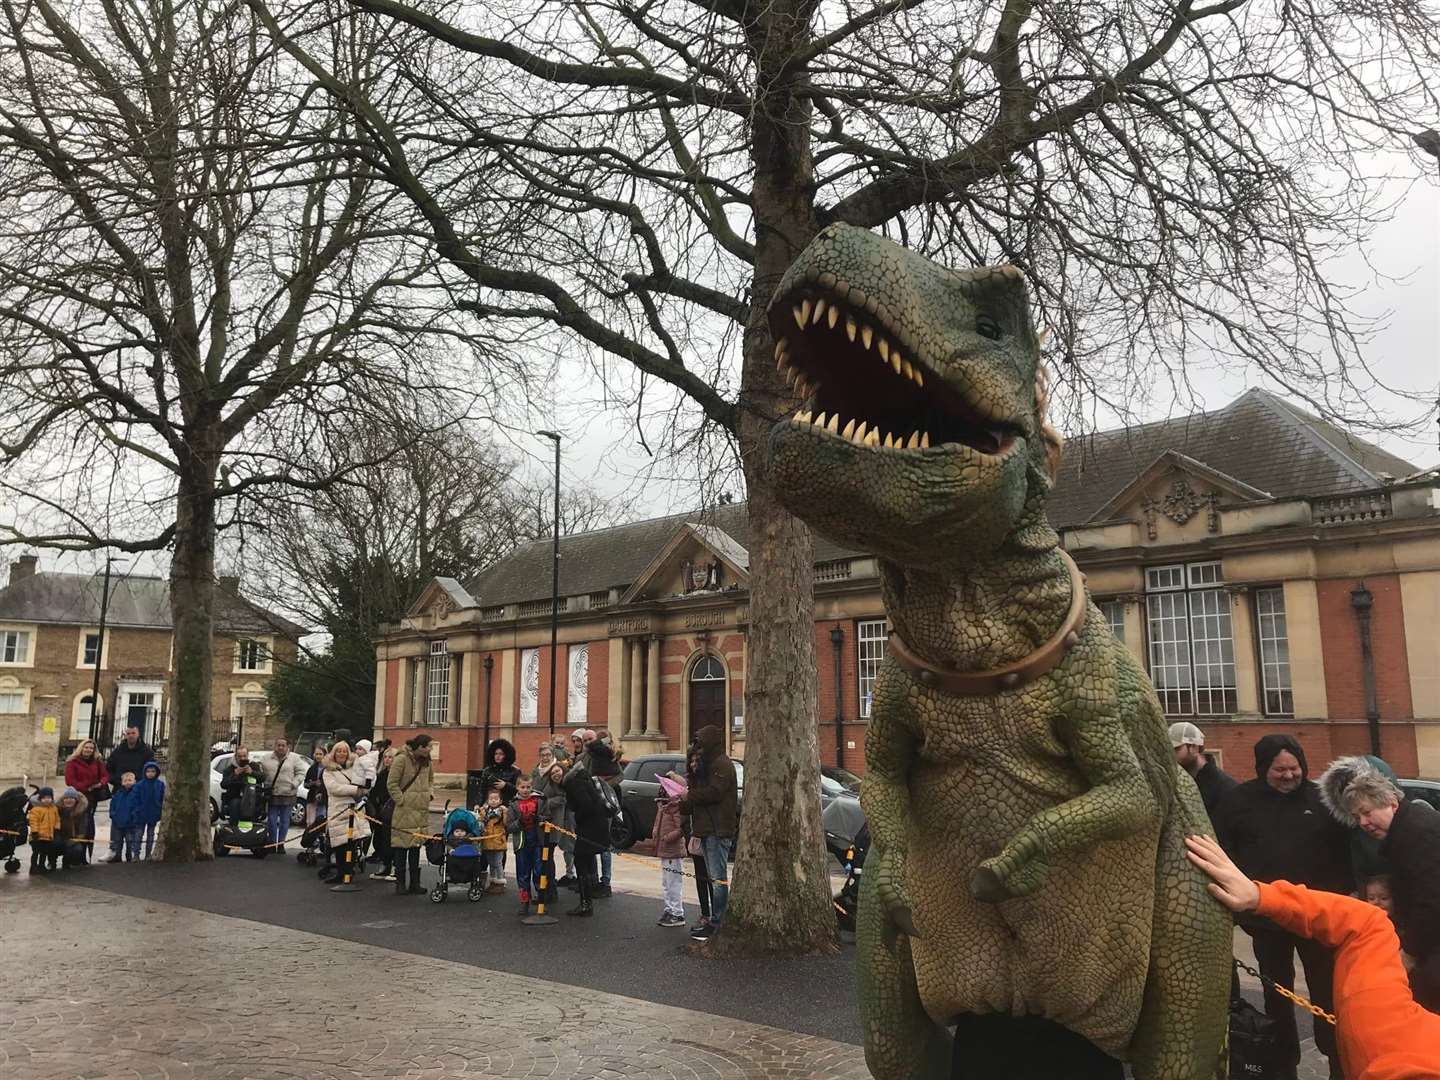 It roared its way into the crowd. Picture: Dartford Borough Council